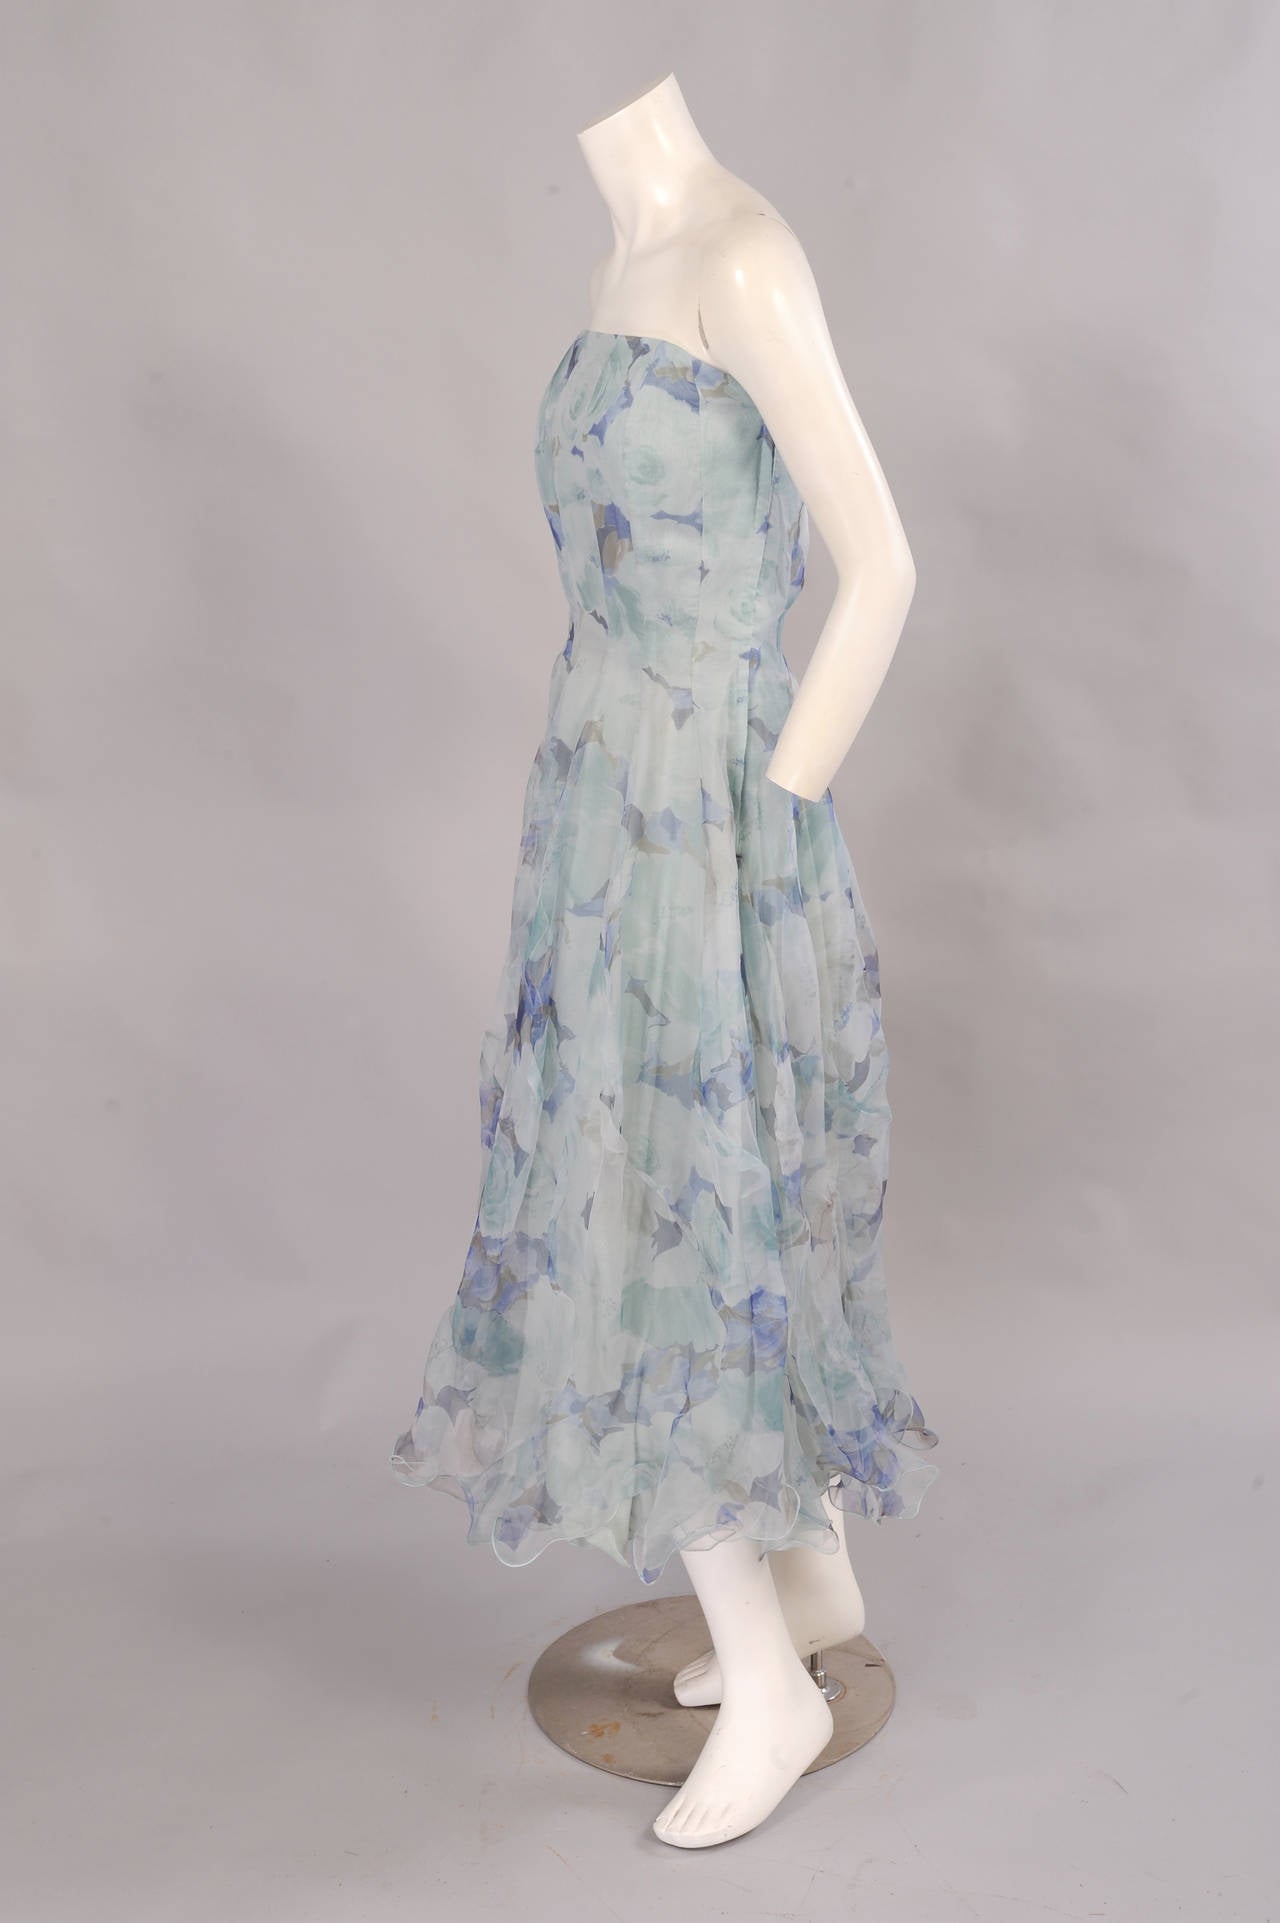 This Spanish made, pale blue water color floral print silk organza dress has a fitted and boned bodice. The gored skirt is seamed for added fullness and finished with a flounce at the hemline. The dress is fully lined in pale blue cotton and there